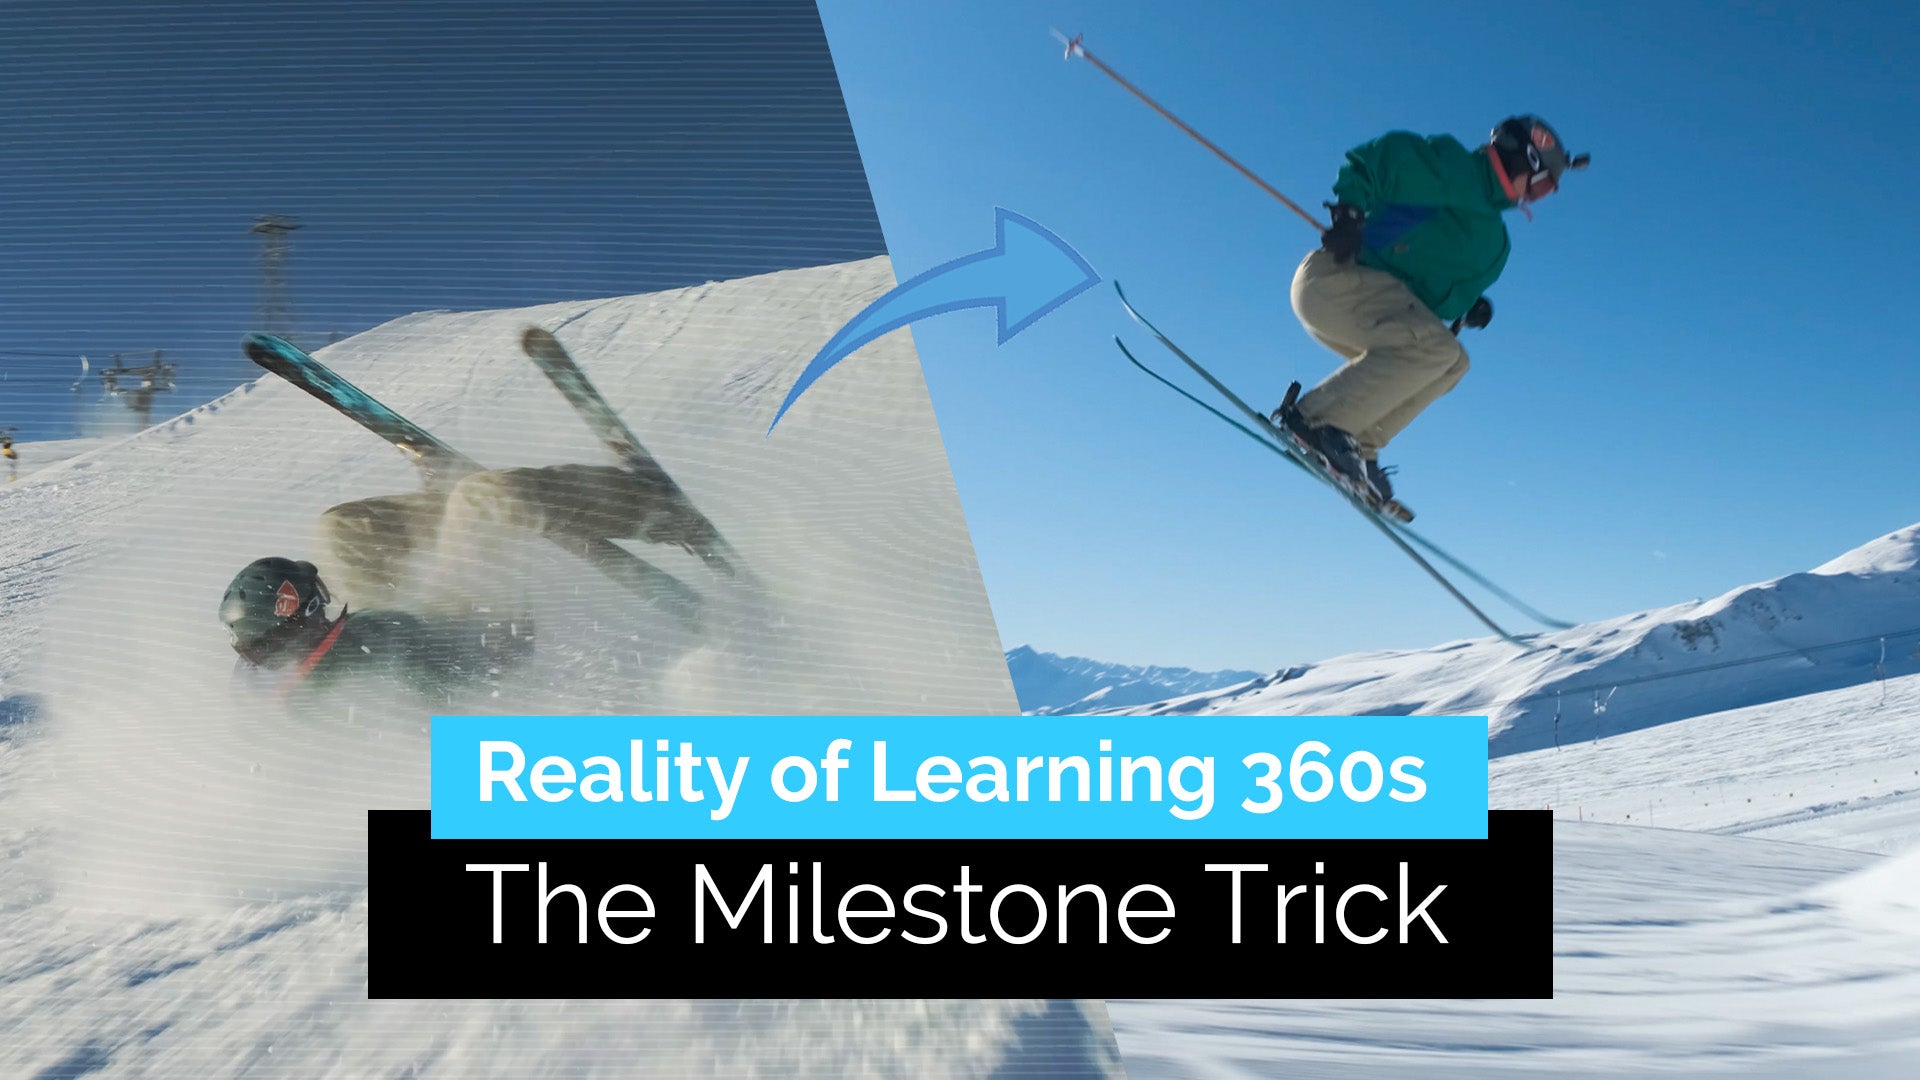 The Reality of Learning 360 on Skis | The Milestone Trick